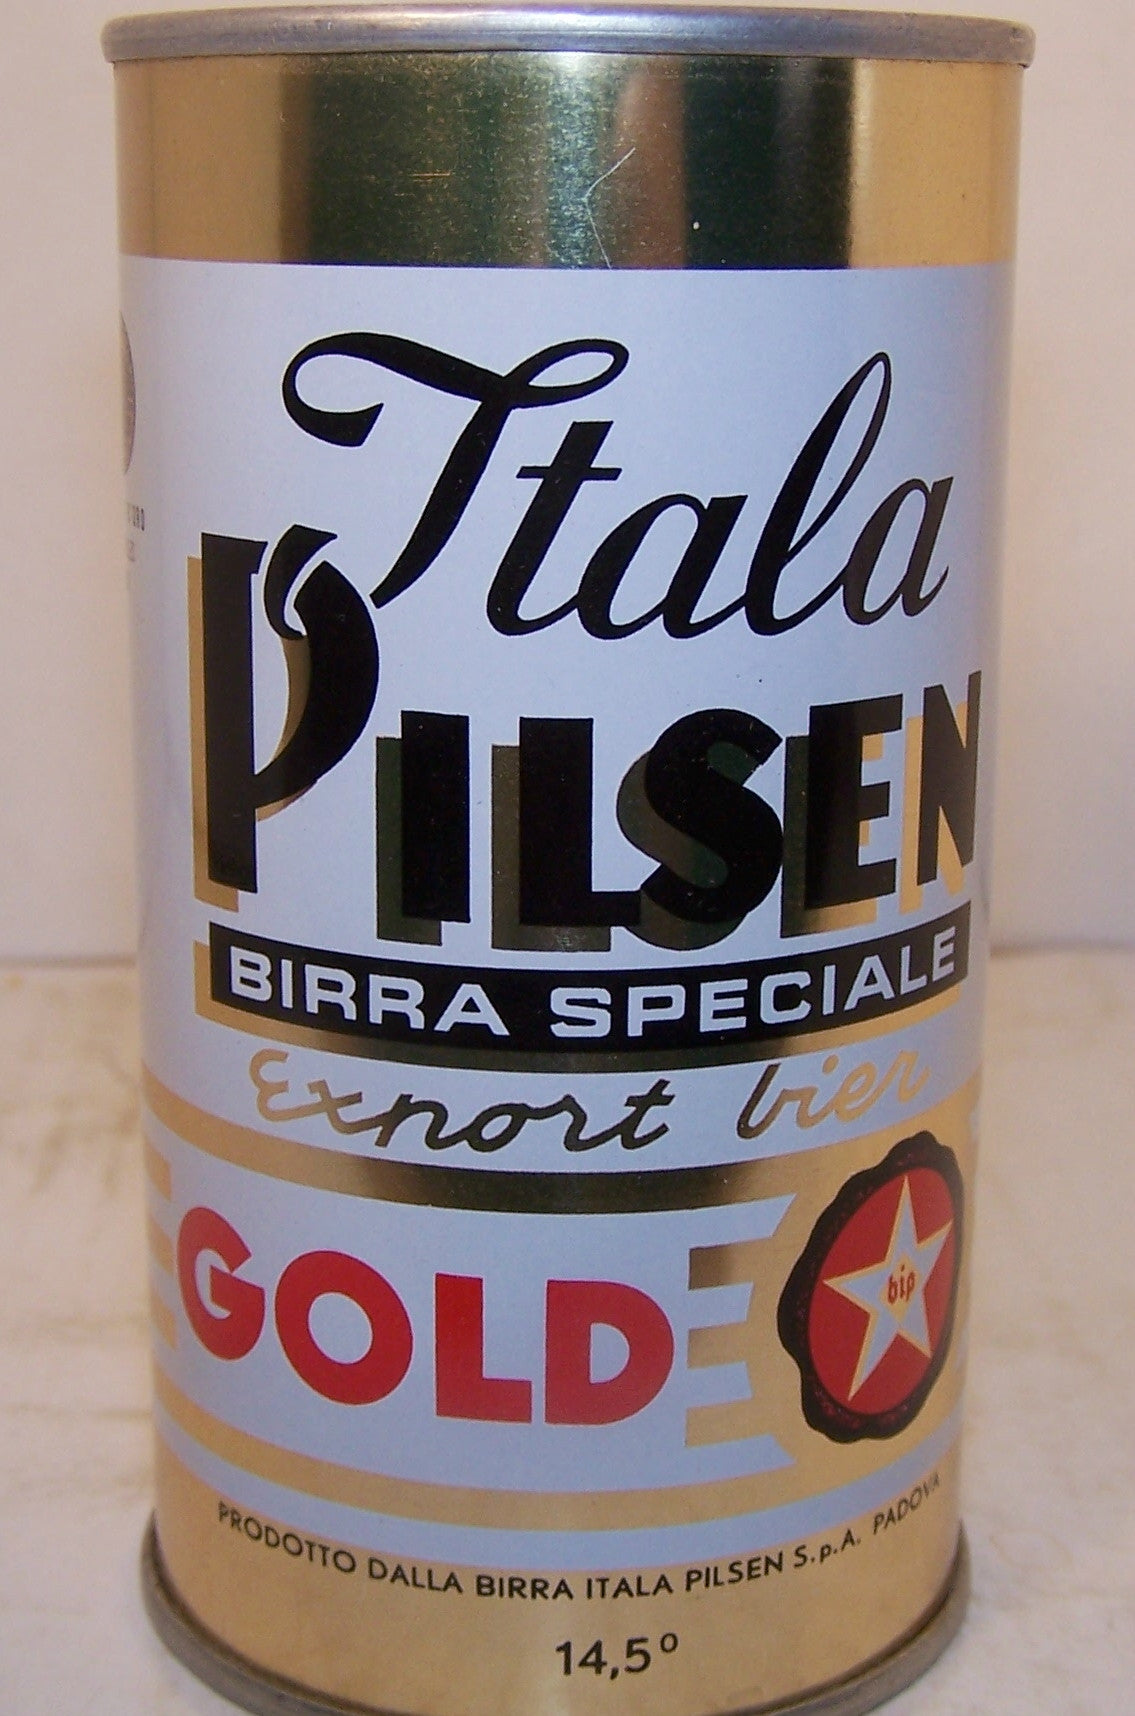 Itala Pilsen export Bier, can is rolled, Grade A1+ Sold on 10/11/15